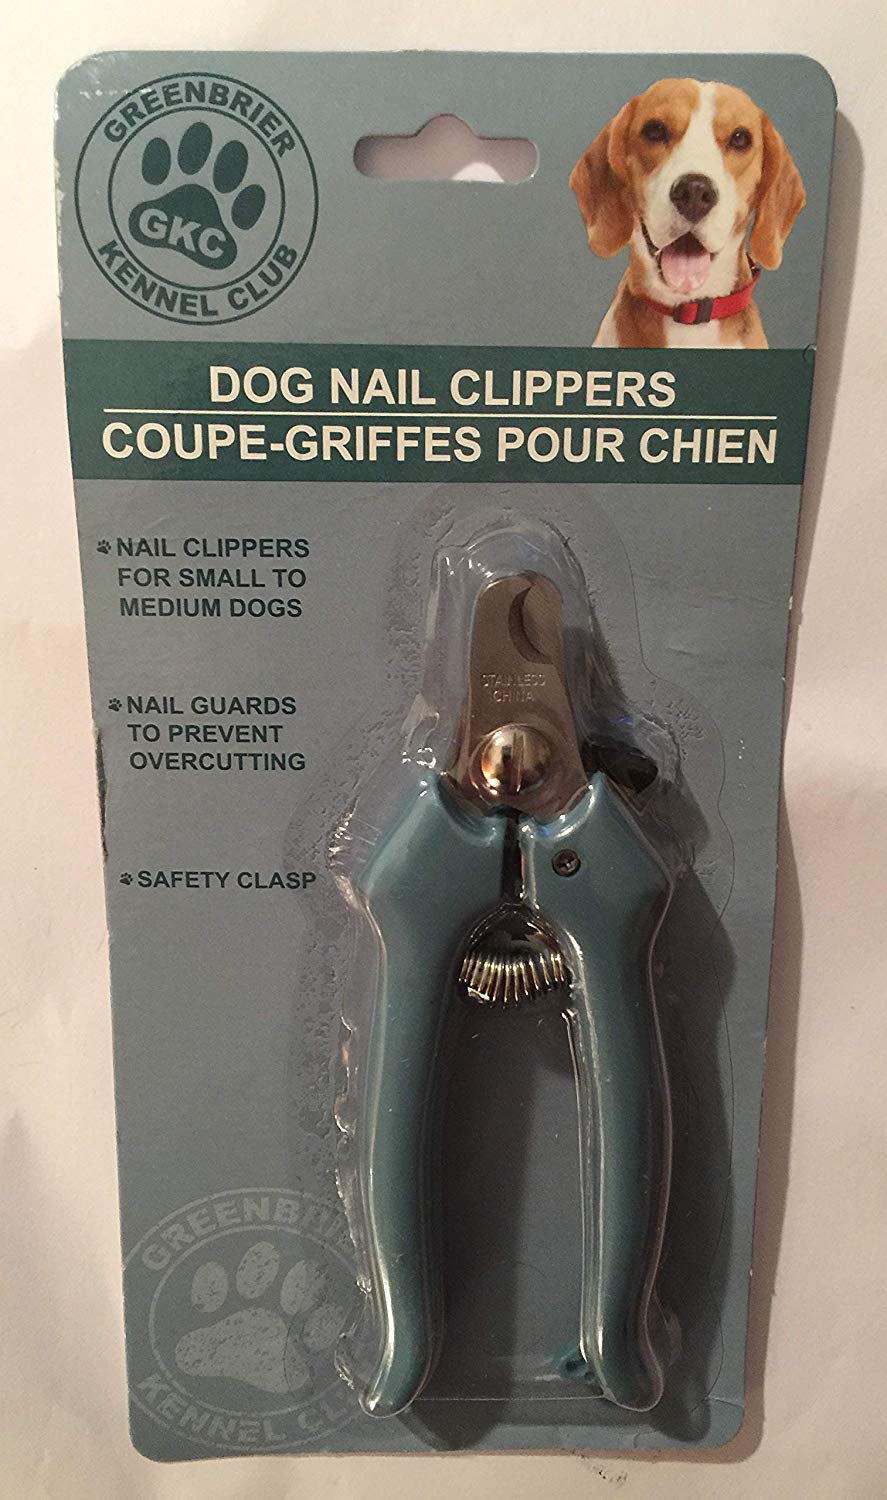 Greenbrier Dog Nail Clippers